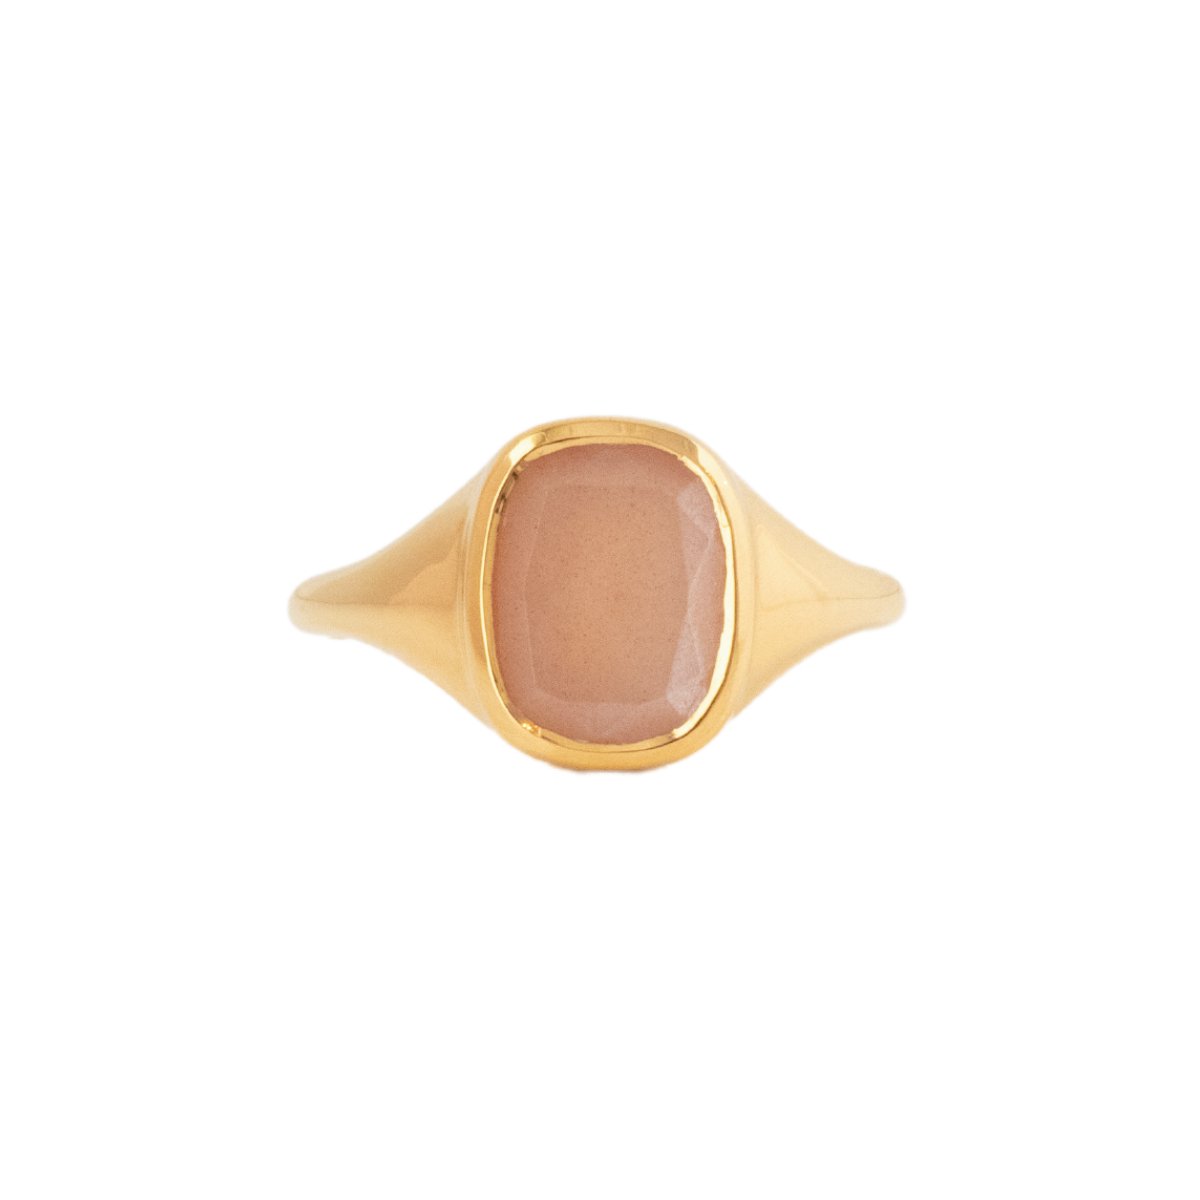 LOVE VINTAGE SIGNET RING - PEACH MOONSTONE &amp; GOLD - SO PRETTY CARA COTTER